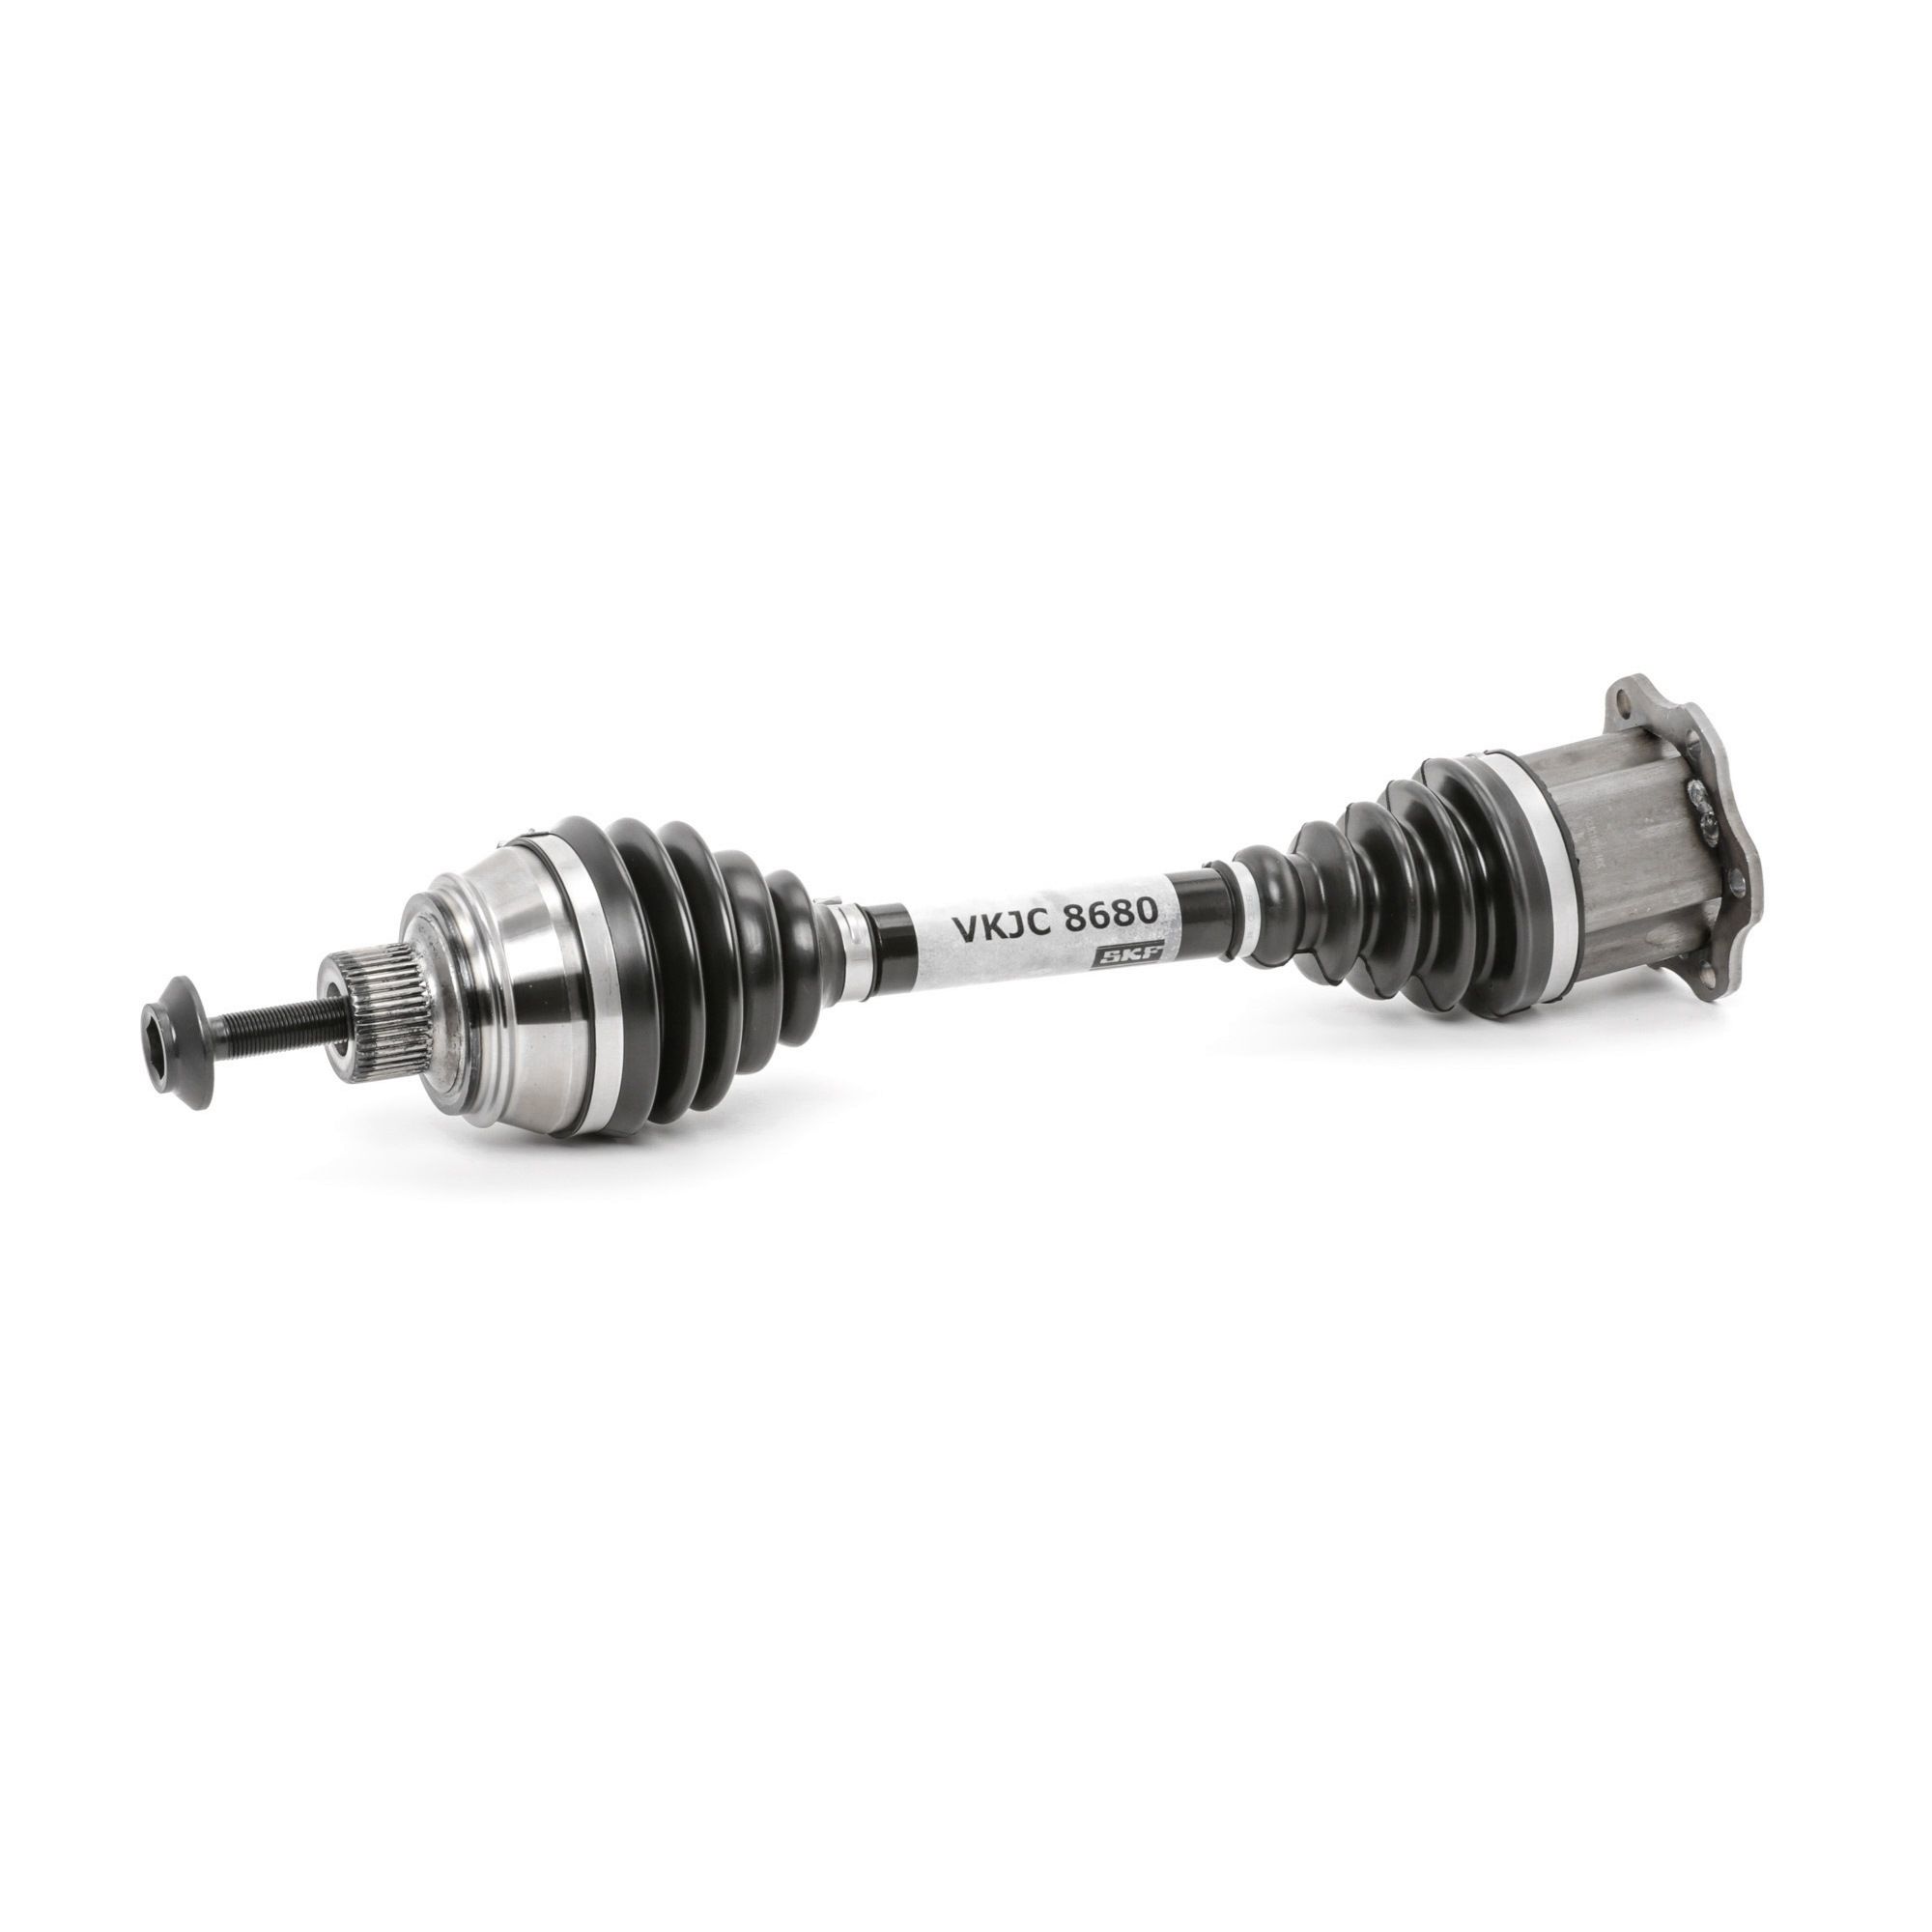 Buy Drive shaft SKF VKJC 8680 - Drive shaft and cv joint parts online